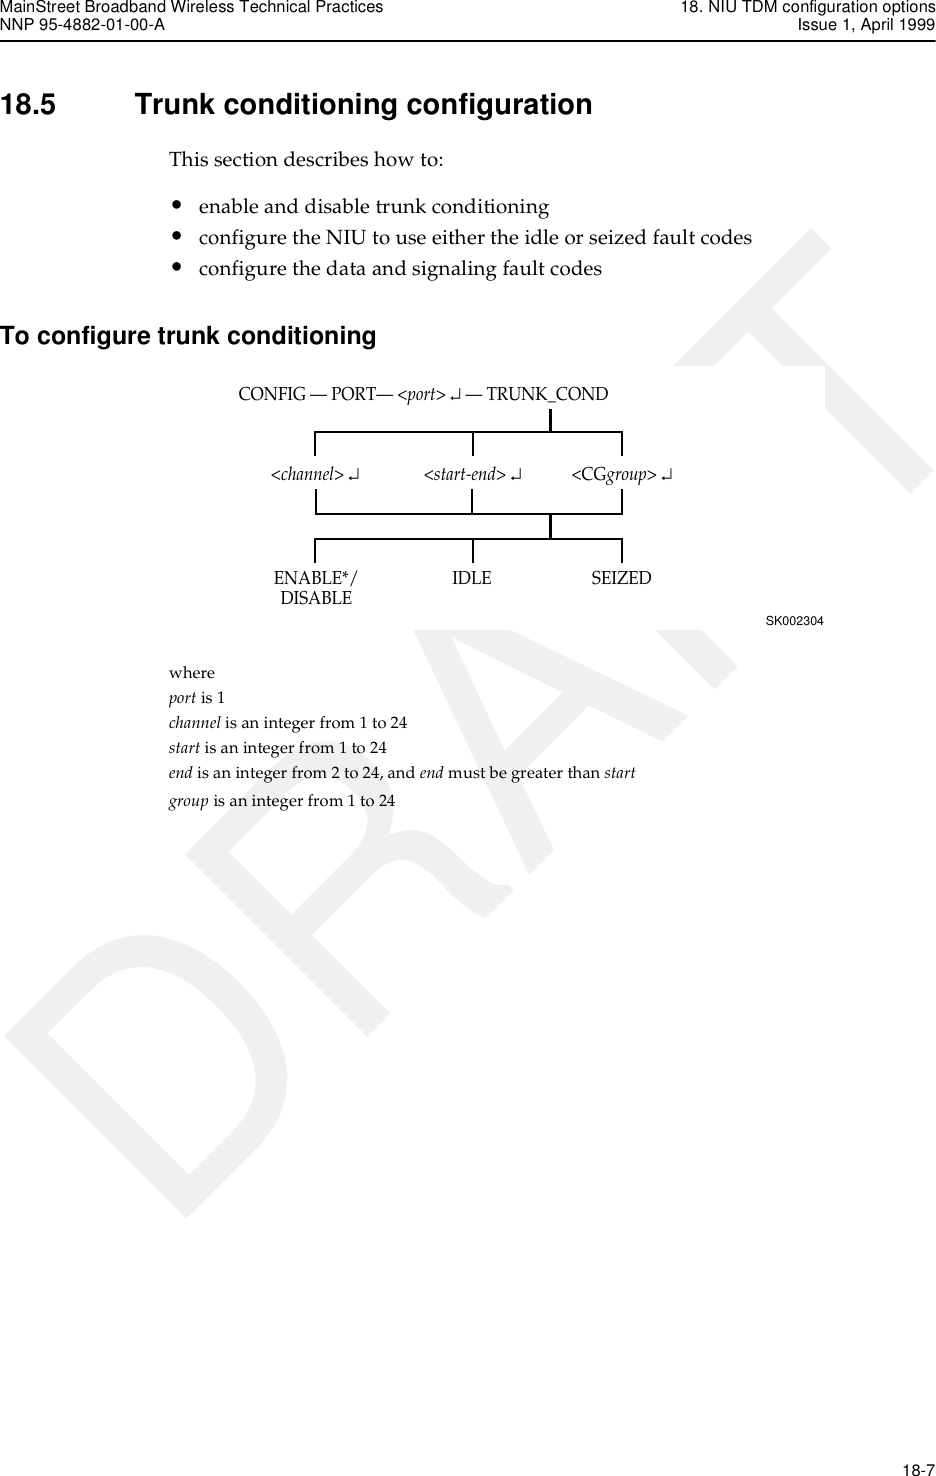 MainStreet Broadband Wireless Technical Practices 18. NIU TDM configuration optionsNNP 95-4882-01-00-A Issue 1, April 1999   18-7DRAFT18.5 Trunk conditioning configurationThis section describes how to:•enable and disable trunk conditioning•configure the NIU to use either the idle or seized fault codes•configure the data and signaling fault codesTo configure trunk conditioningwhere port is 1channel is an integer from 1 to 24start is an integer from 1 to 24end is an integer from 2 to 24, and end must be greater than startgroup is an integer from 1 to 24CONFIG — PORT— &lt;port&gt; ↵ — TRUNK_CONDSK002304&lt;CGgroup&gt; ↵SEIZEDIDLEENABLE*/DISABLE&lt;channel&gt; ↵&lt;start-end&gt; ↵